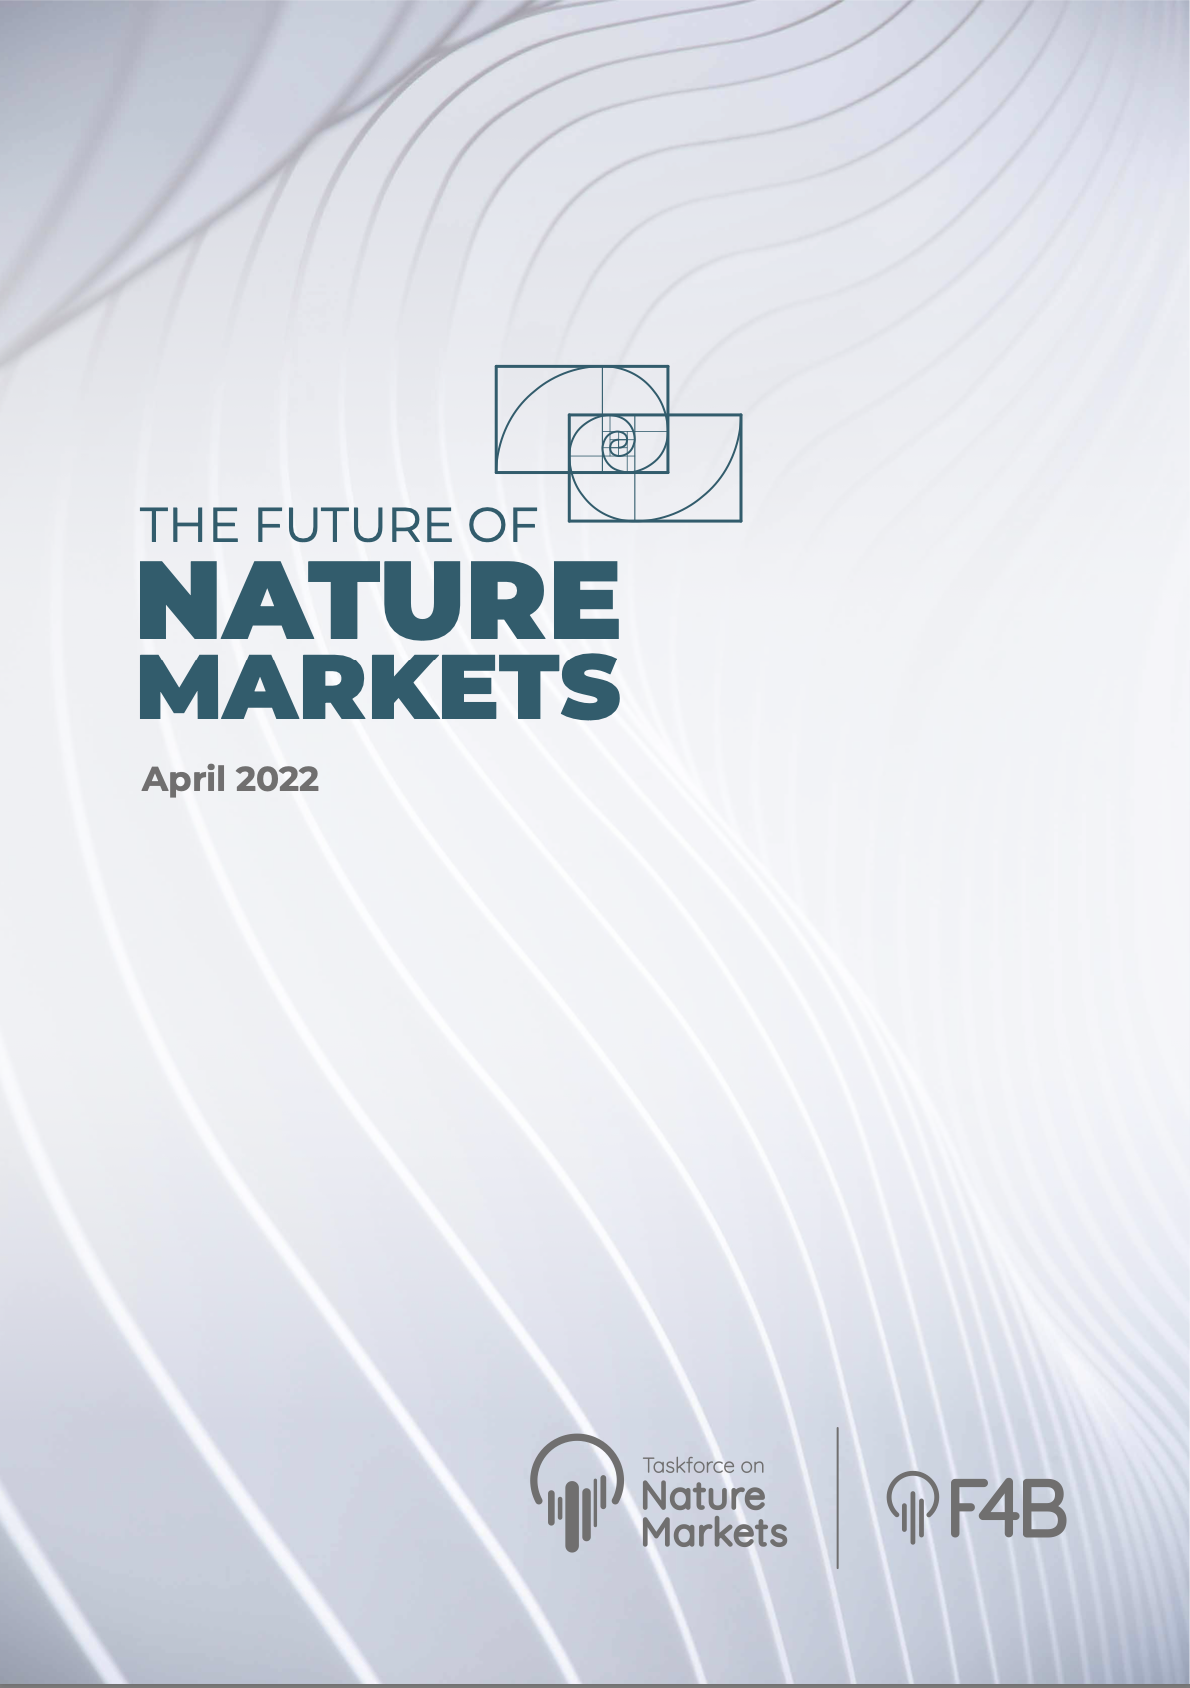 The Future of Nature Markets